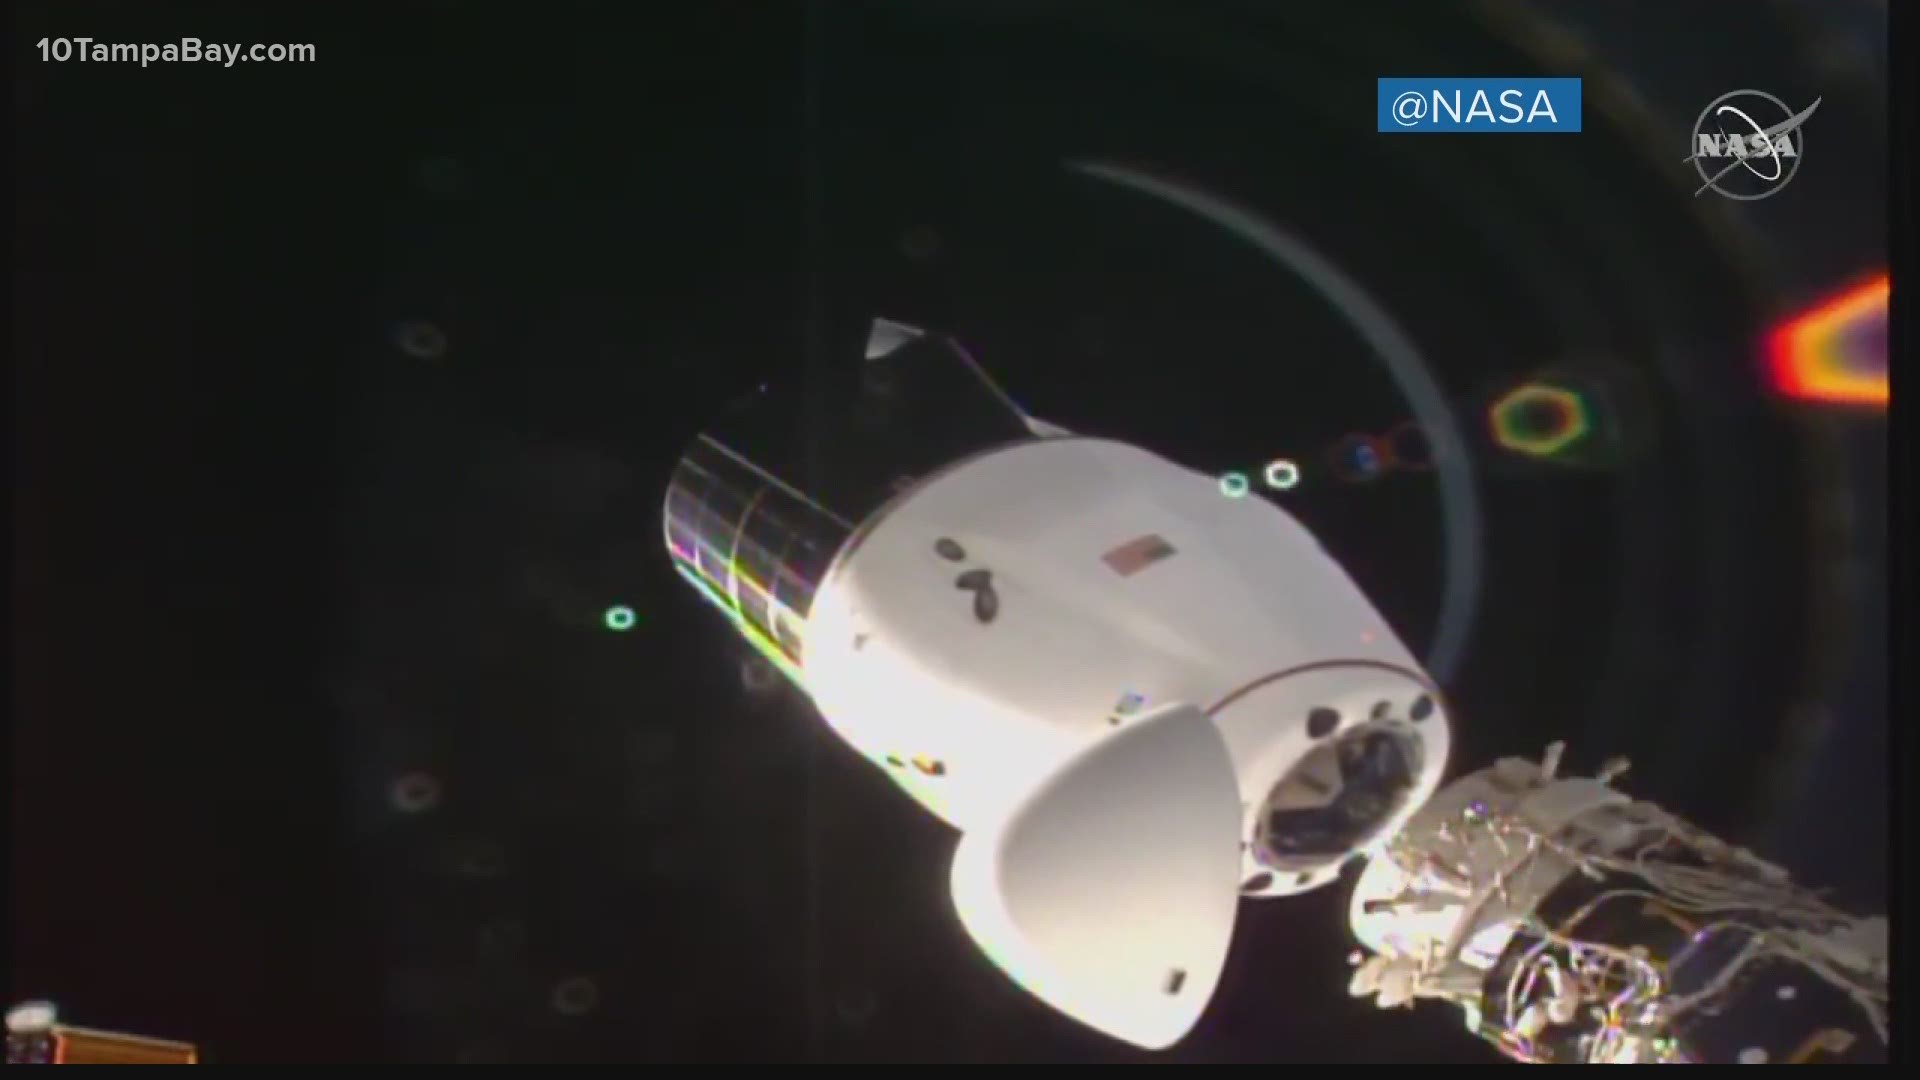 The capsule will bring back science experiments from the International Space Station.